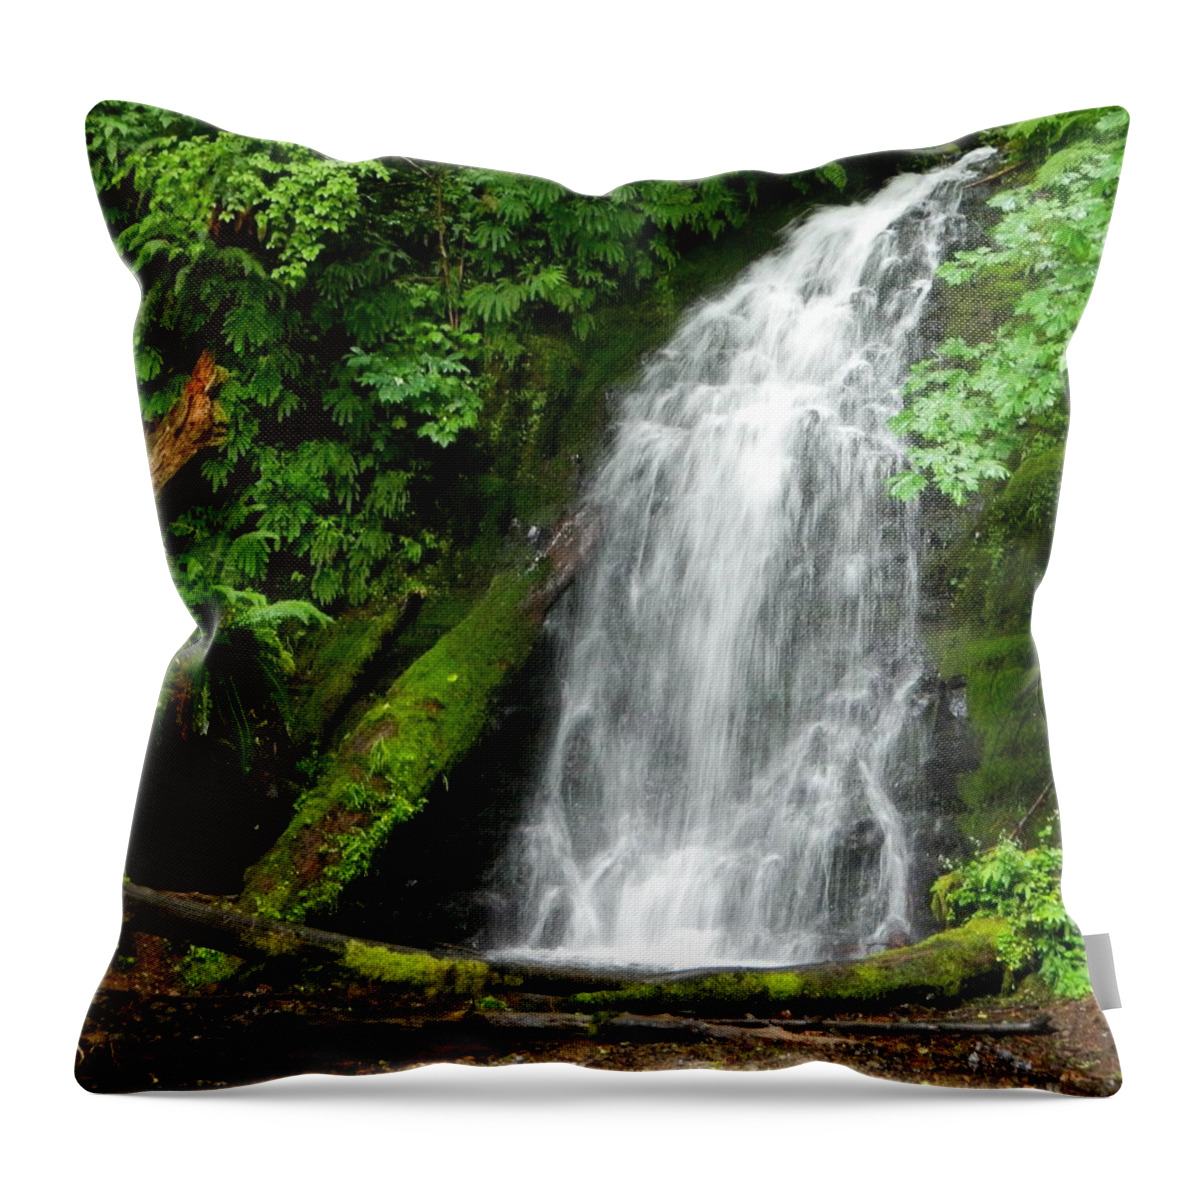 Oregon Throw Pillow featuring the photograph Wilson River Hwy Waterfall by Gallery Of Hope 